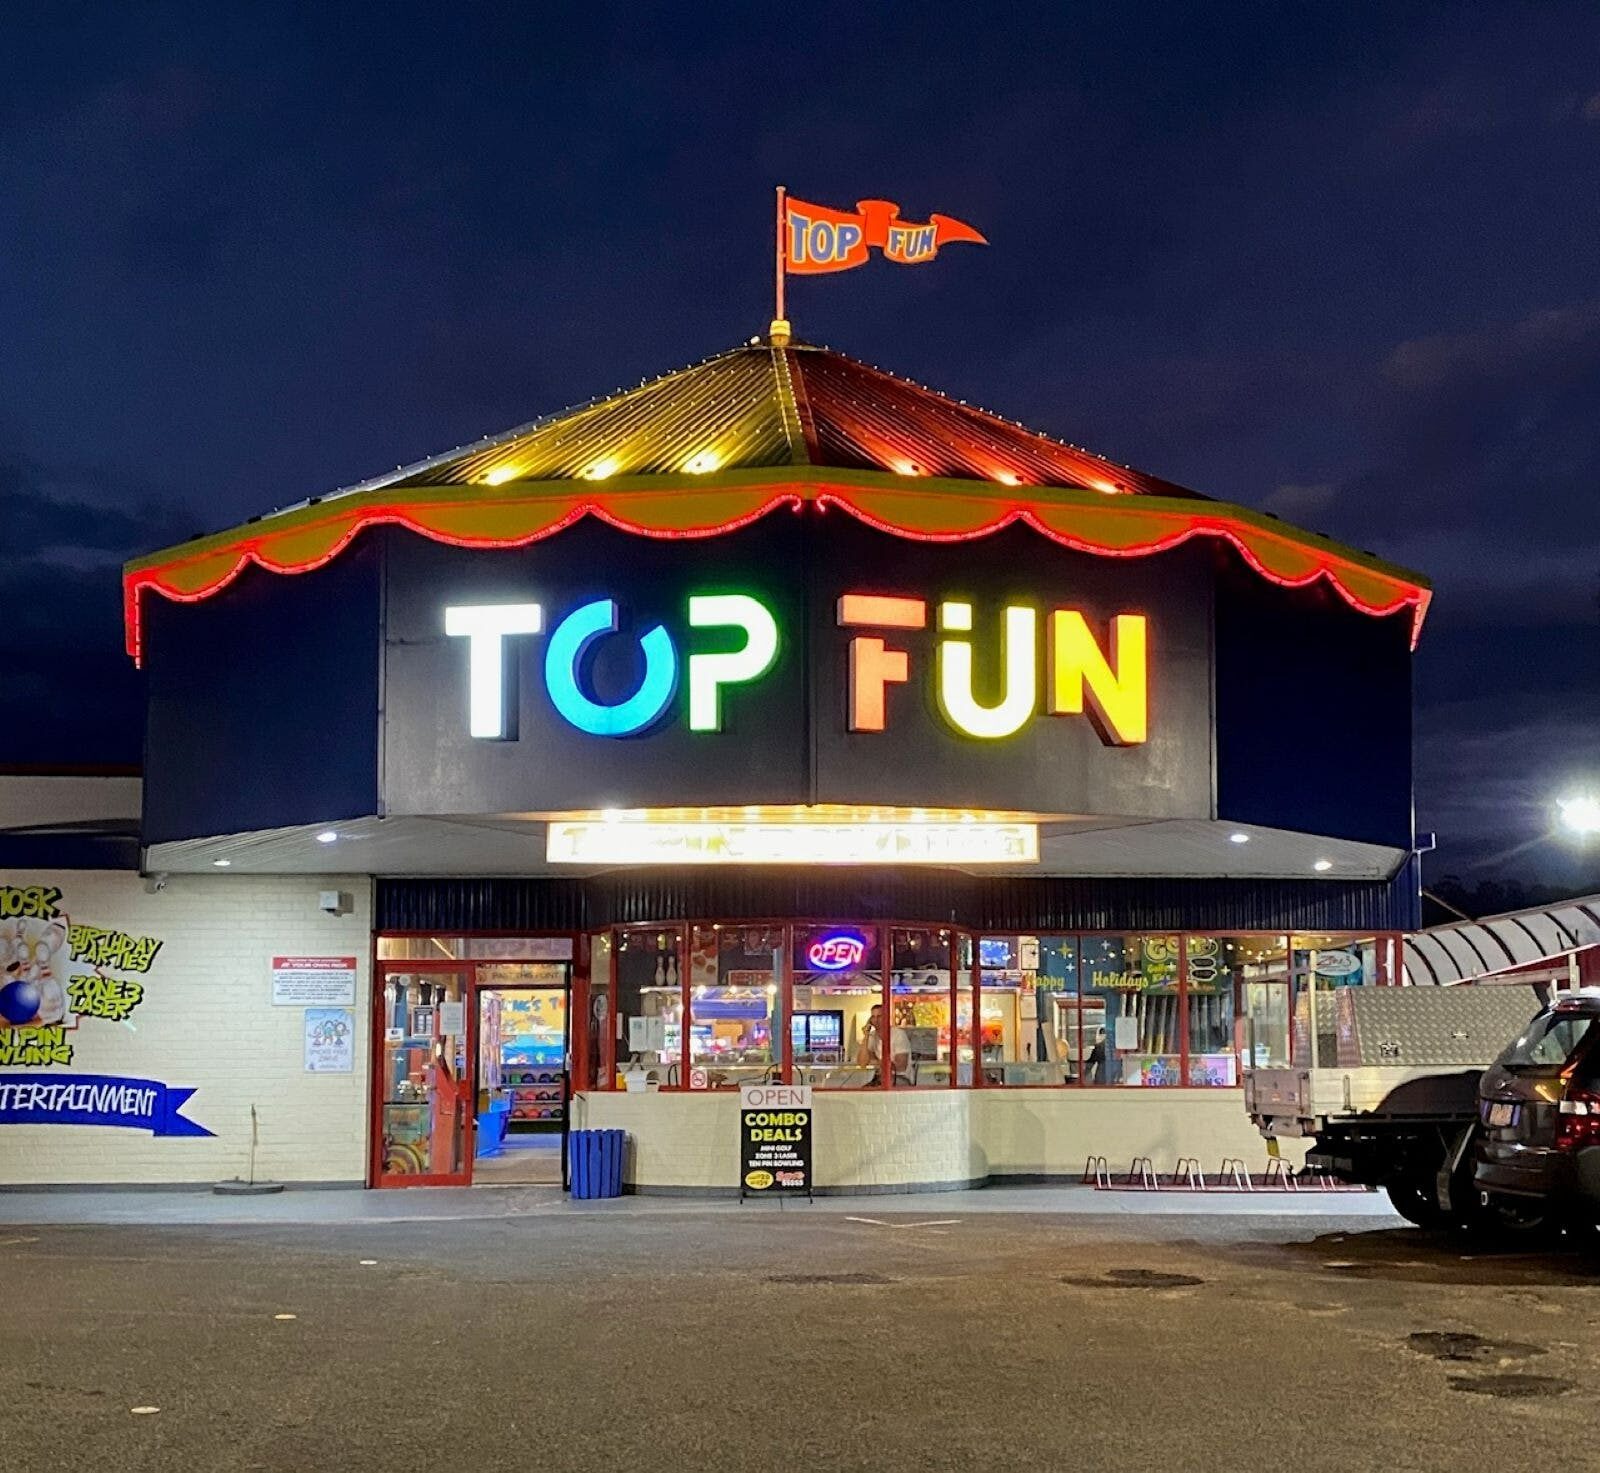 Top Fun at night can be seen from afar